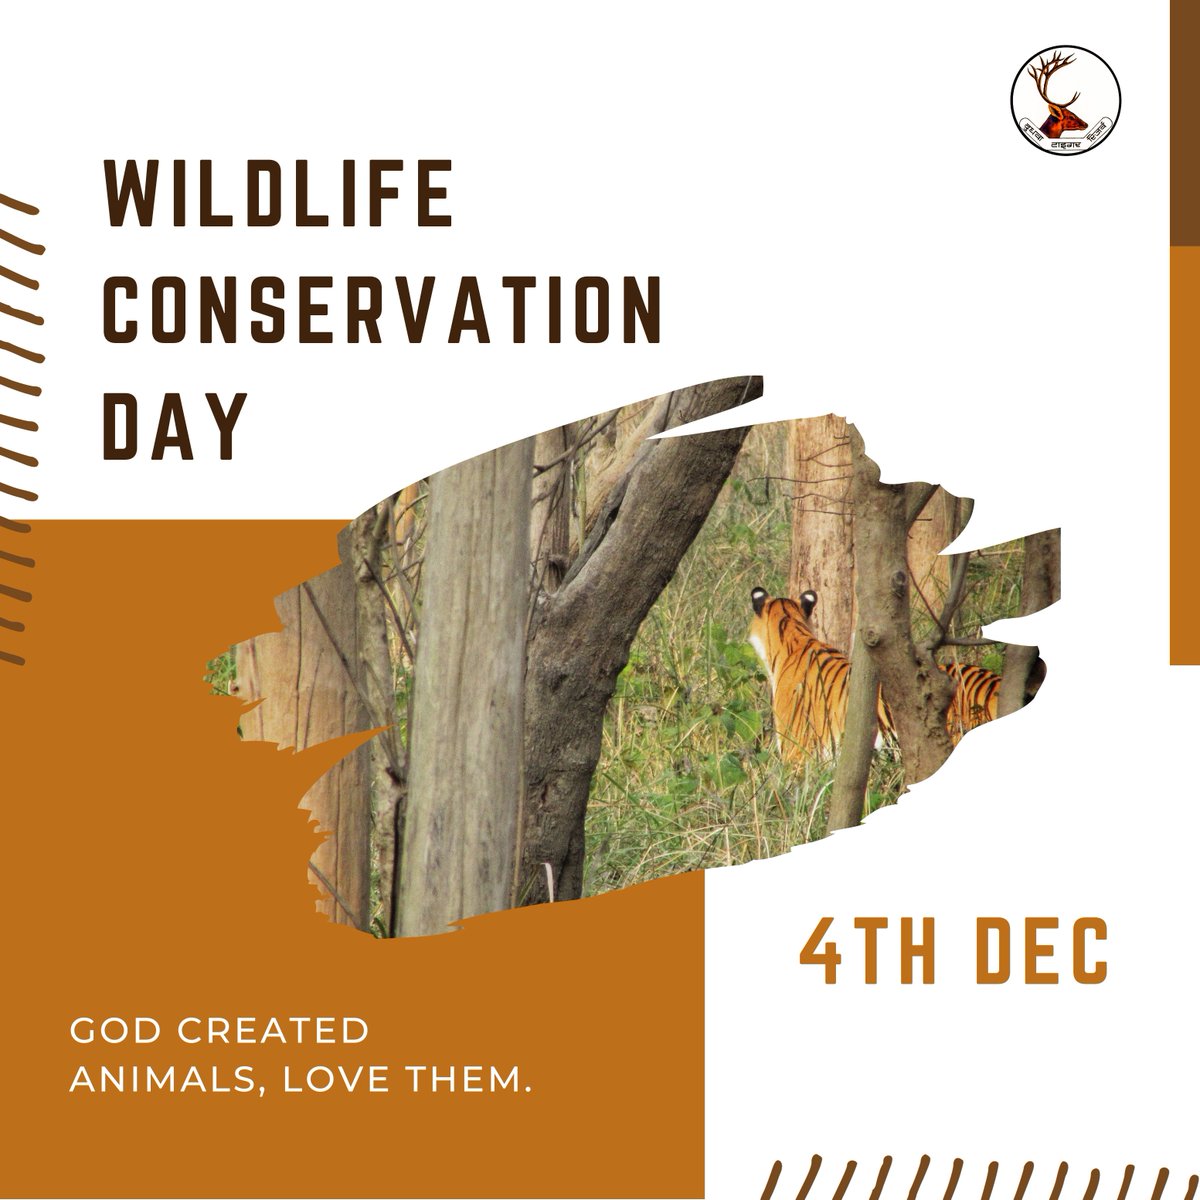 Dedicated efforts to protect our planet's incredible creatures & their habitats, ensuring future generations get to share in the wonder of nature.

#WildlifeConservationDay
#Save_wildlife

@moefcc
@ntca_india @UpforestUp @ifs_lalit @raju2179